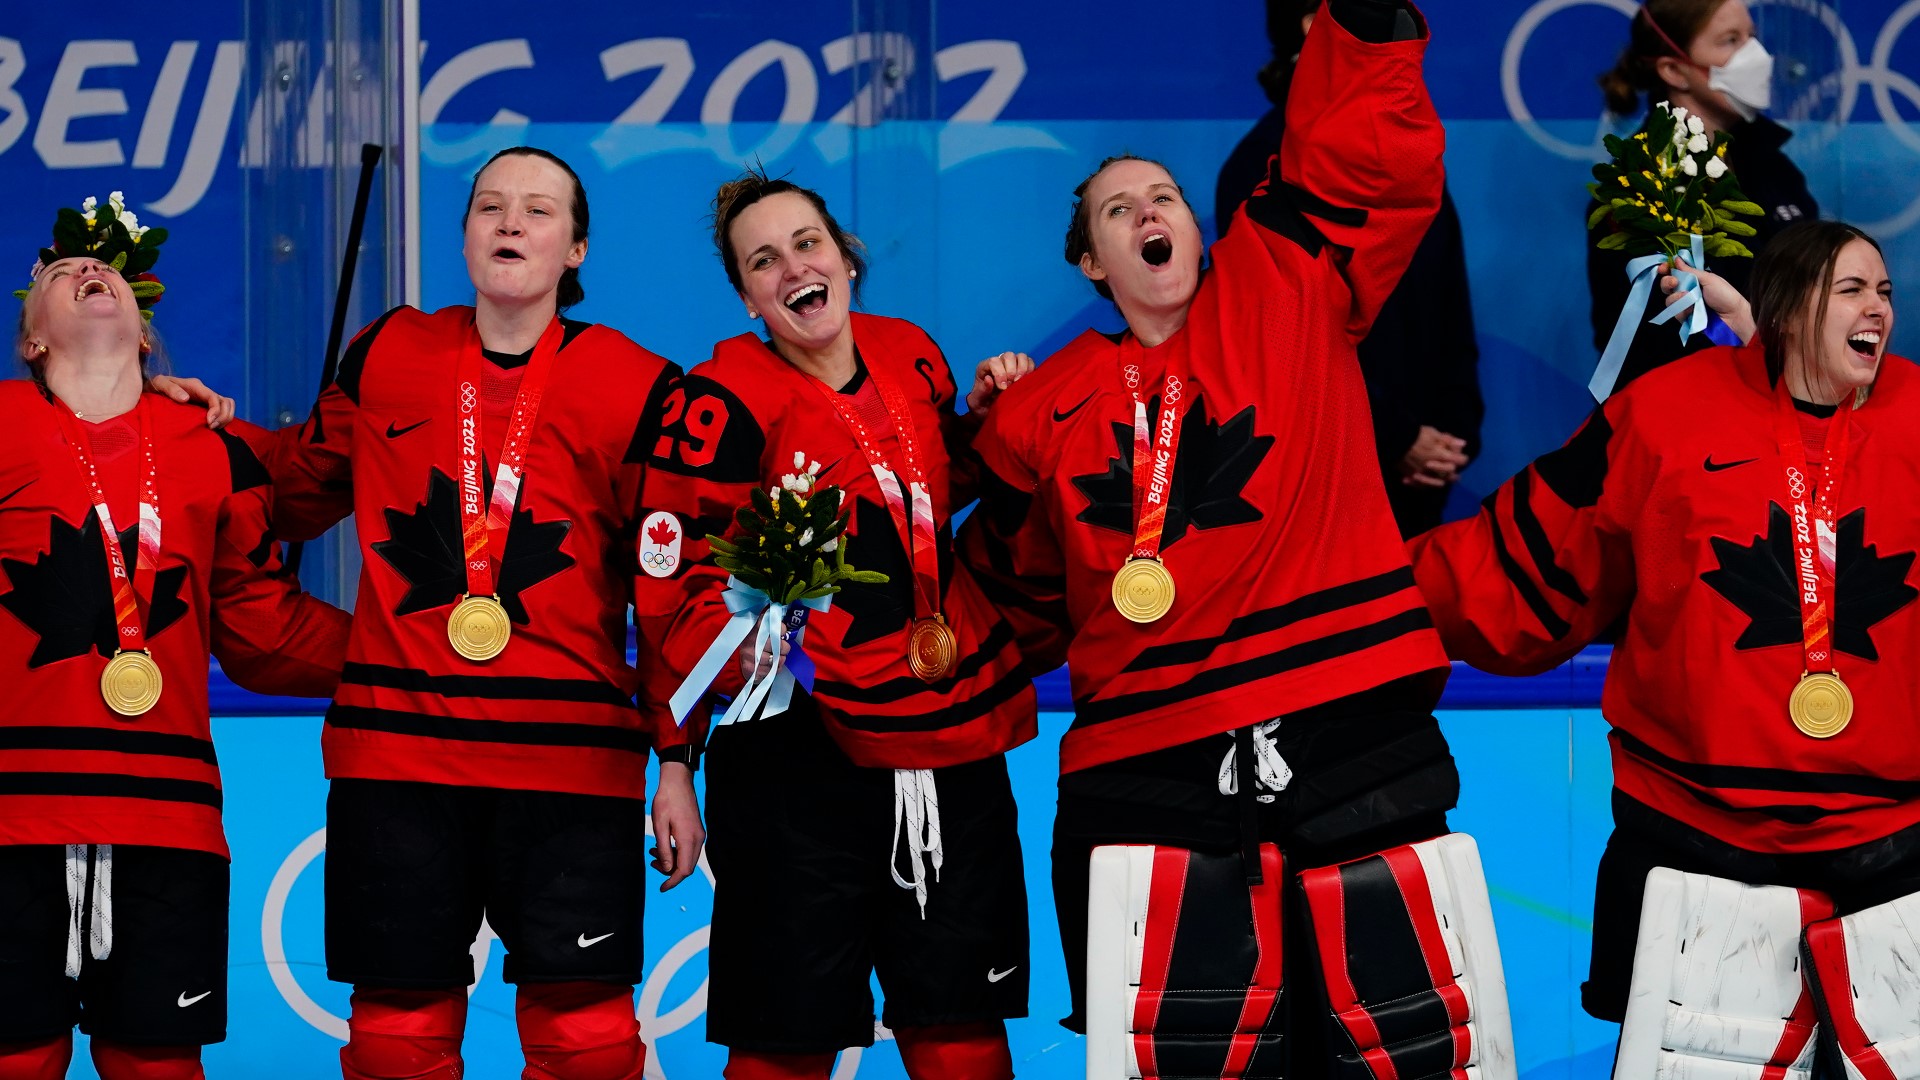 Canada defeated the U.S. 3-2 in the women's gold medal game at the Winter Olympics. The American defending champions took home silver.